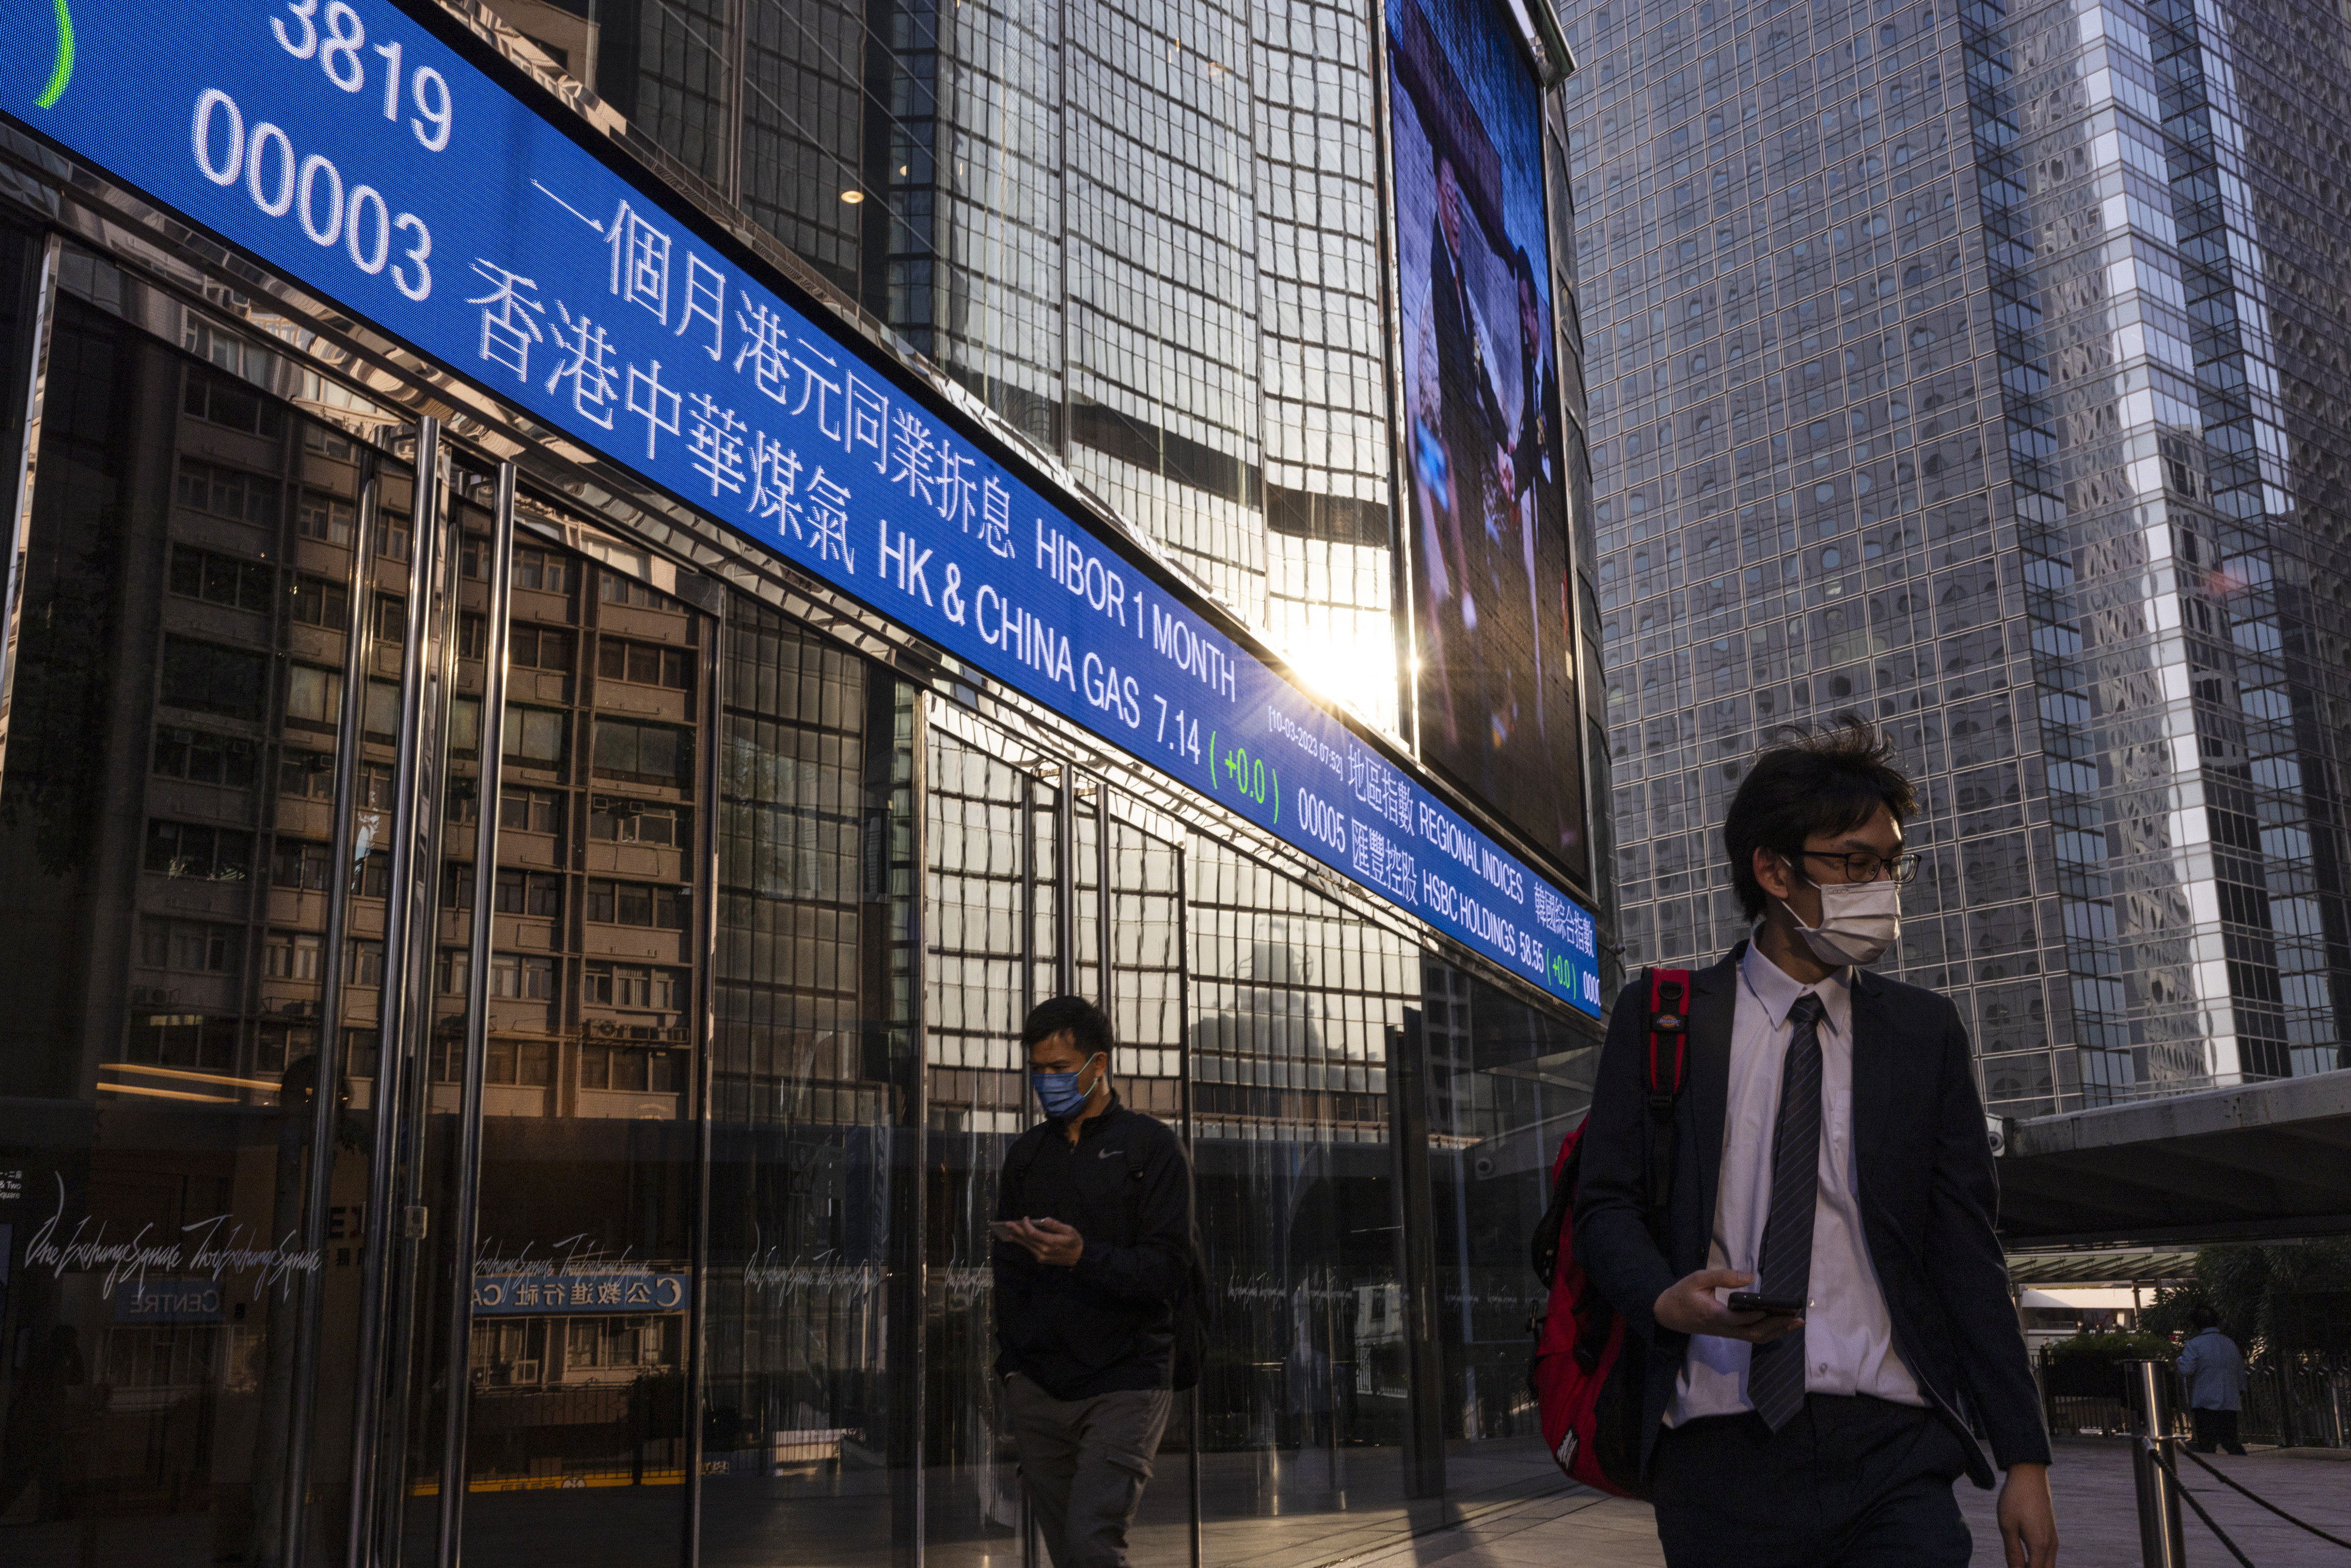 People walk past an electronic screen in Central, Hong Kong on March 10, 2023. Photo: AP